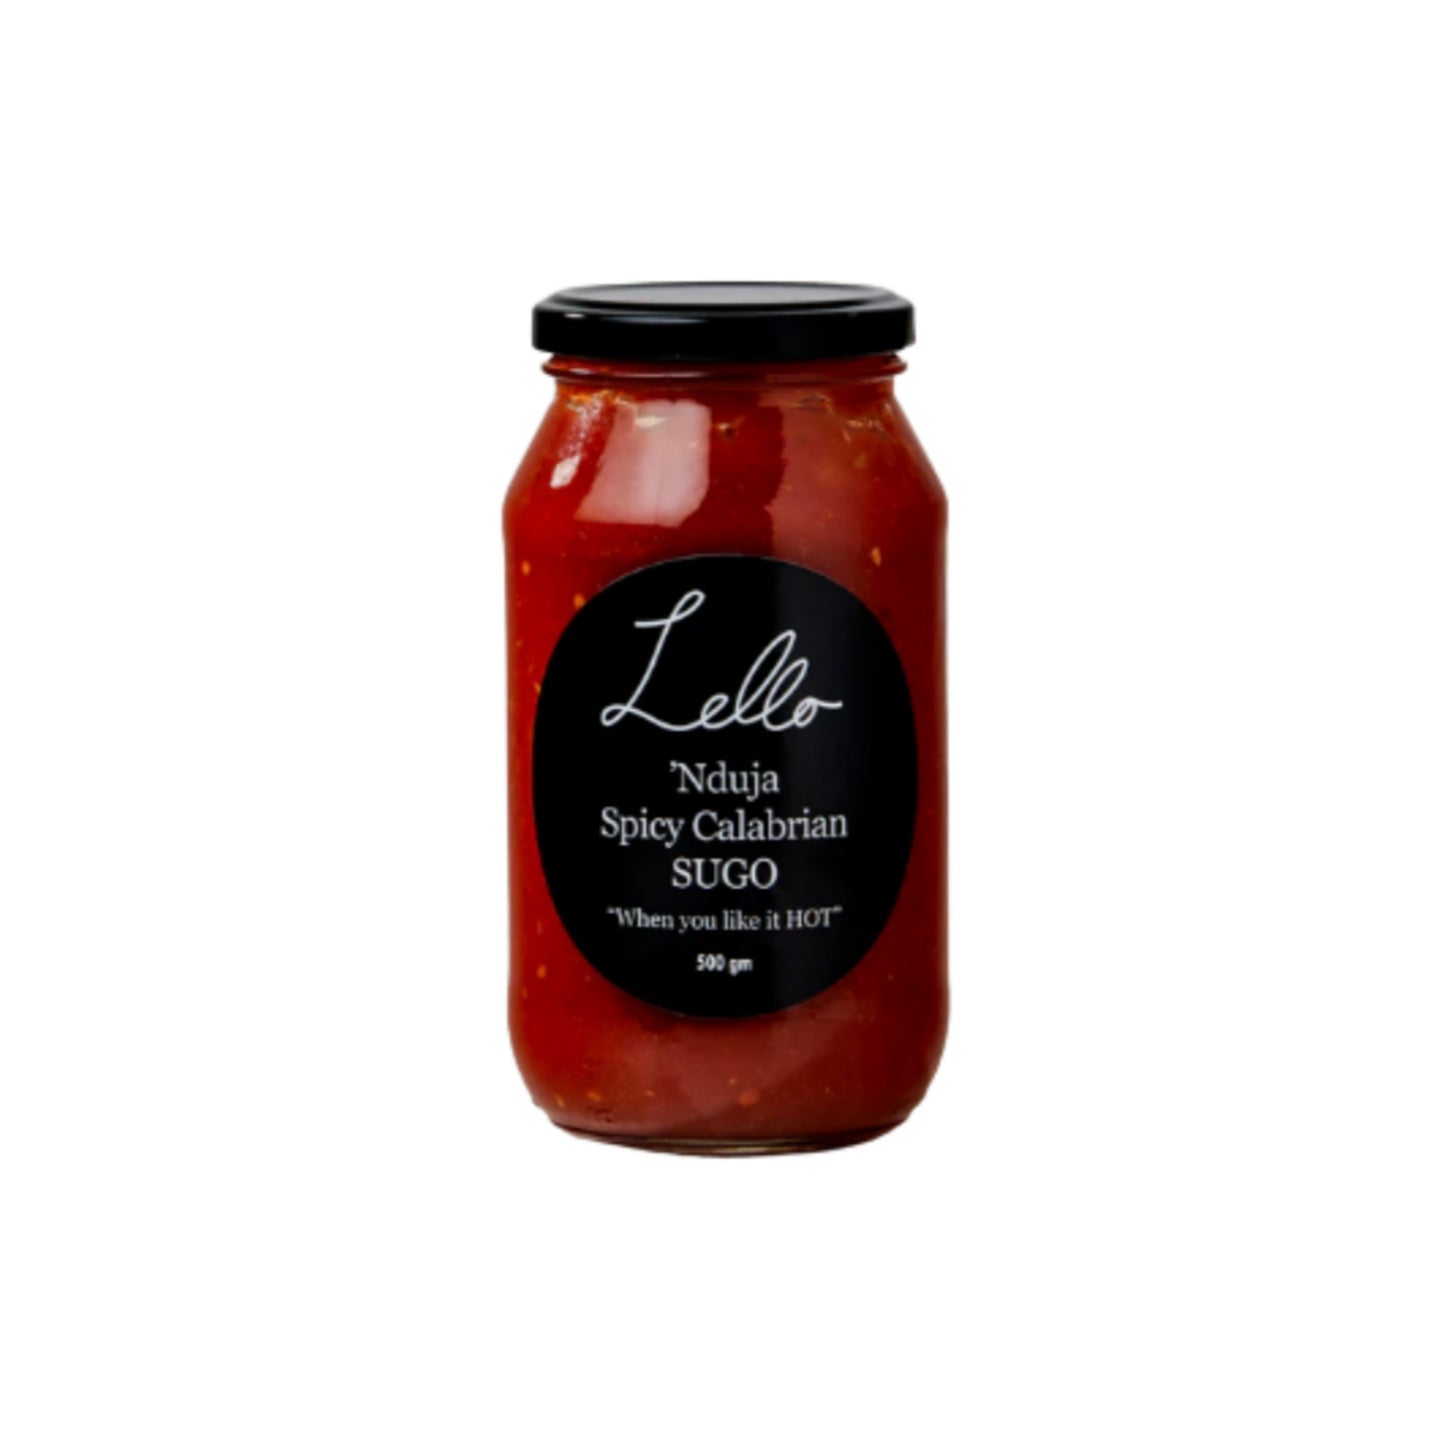 Lello 'Nduja Calabrian Spicy Sugo 500g - Frankies Pantry and Cellar